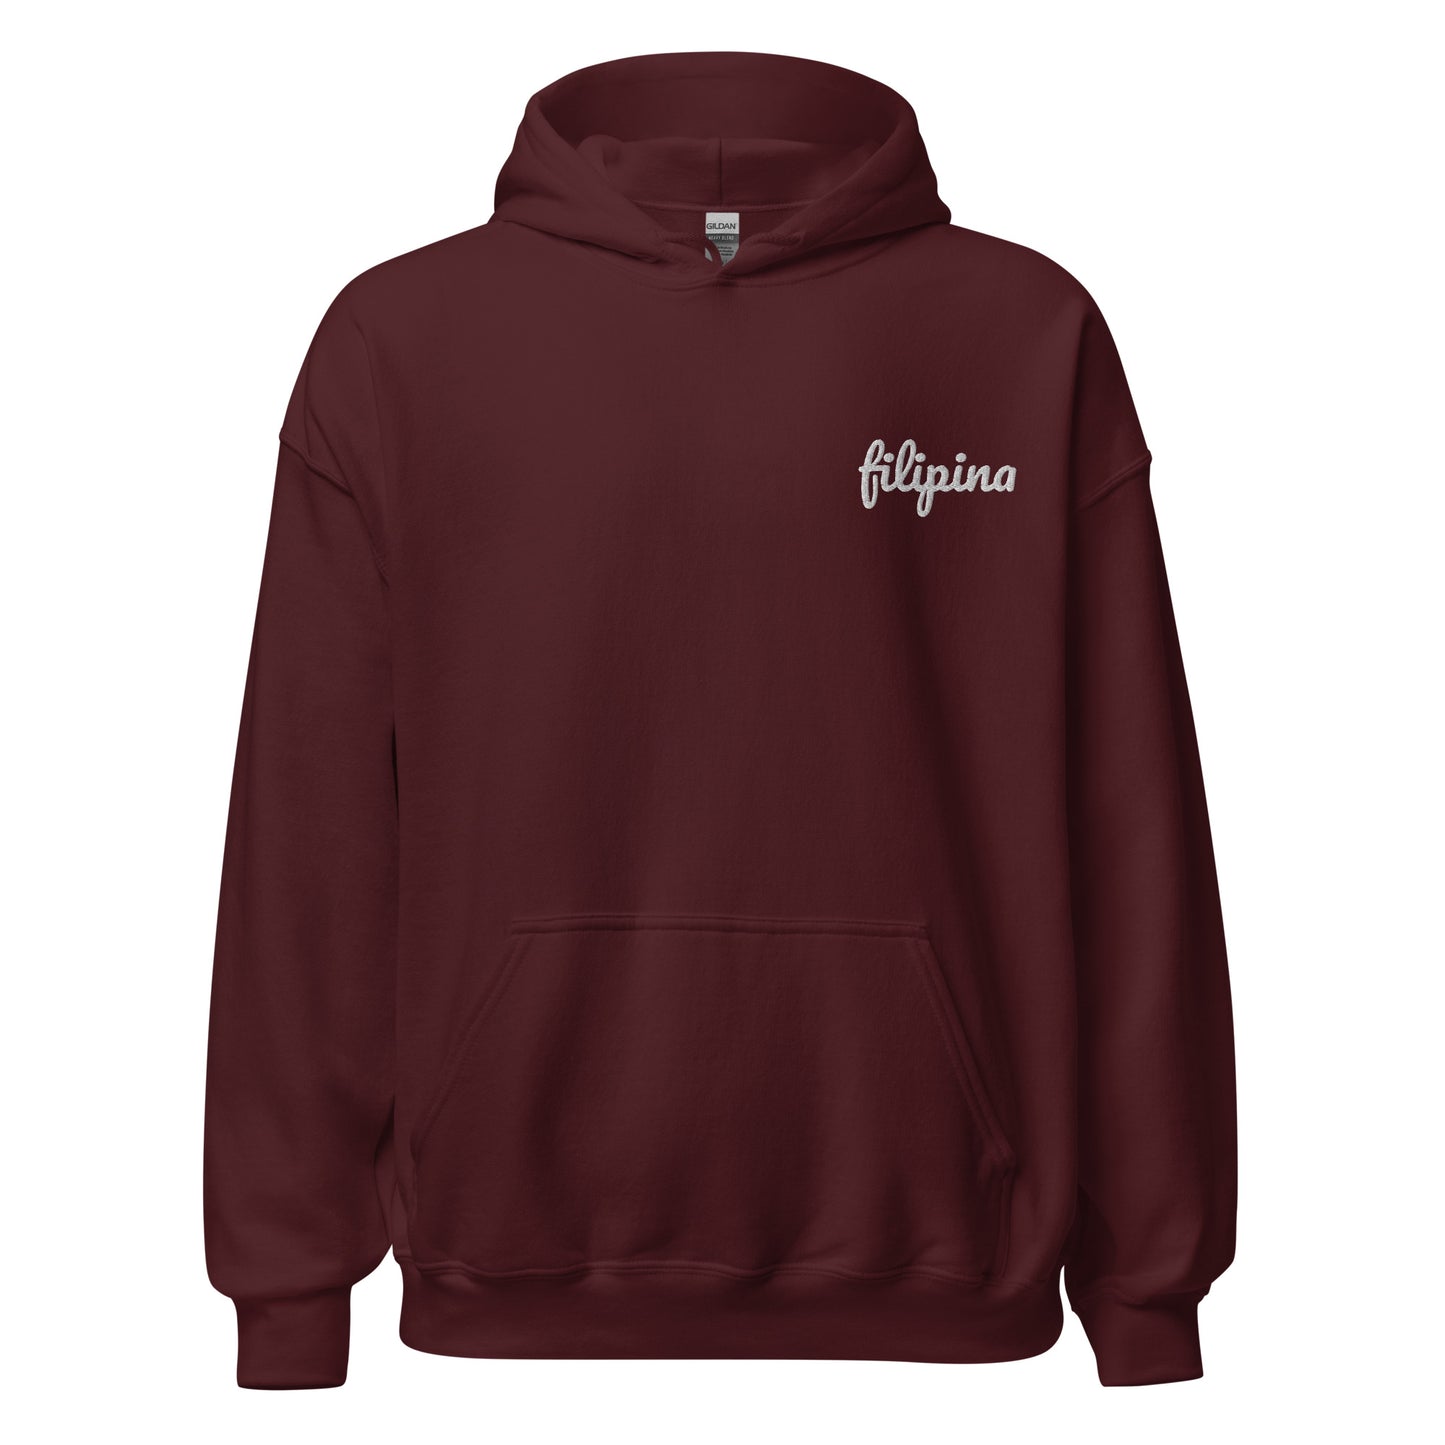 Filipino Hoodie Filipina Statement Embroidered Merch in color variant Maroon